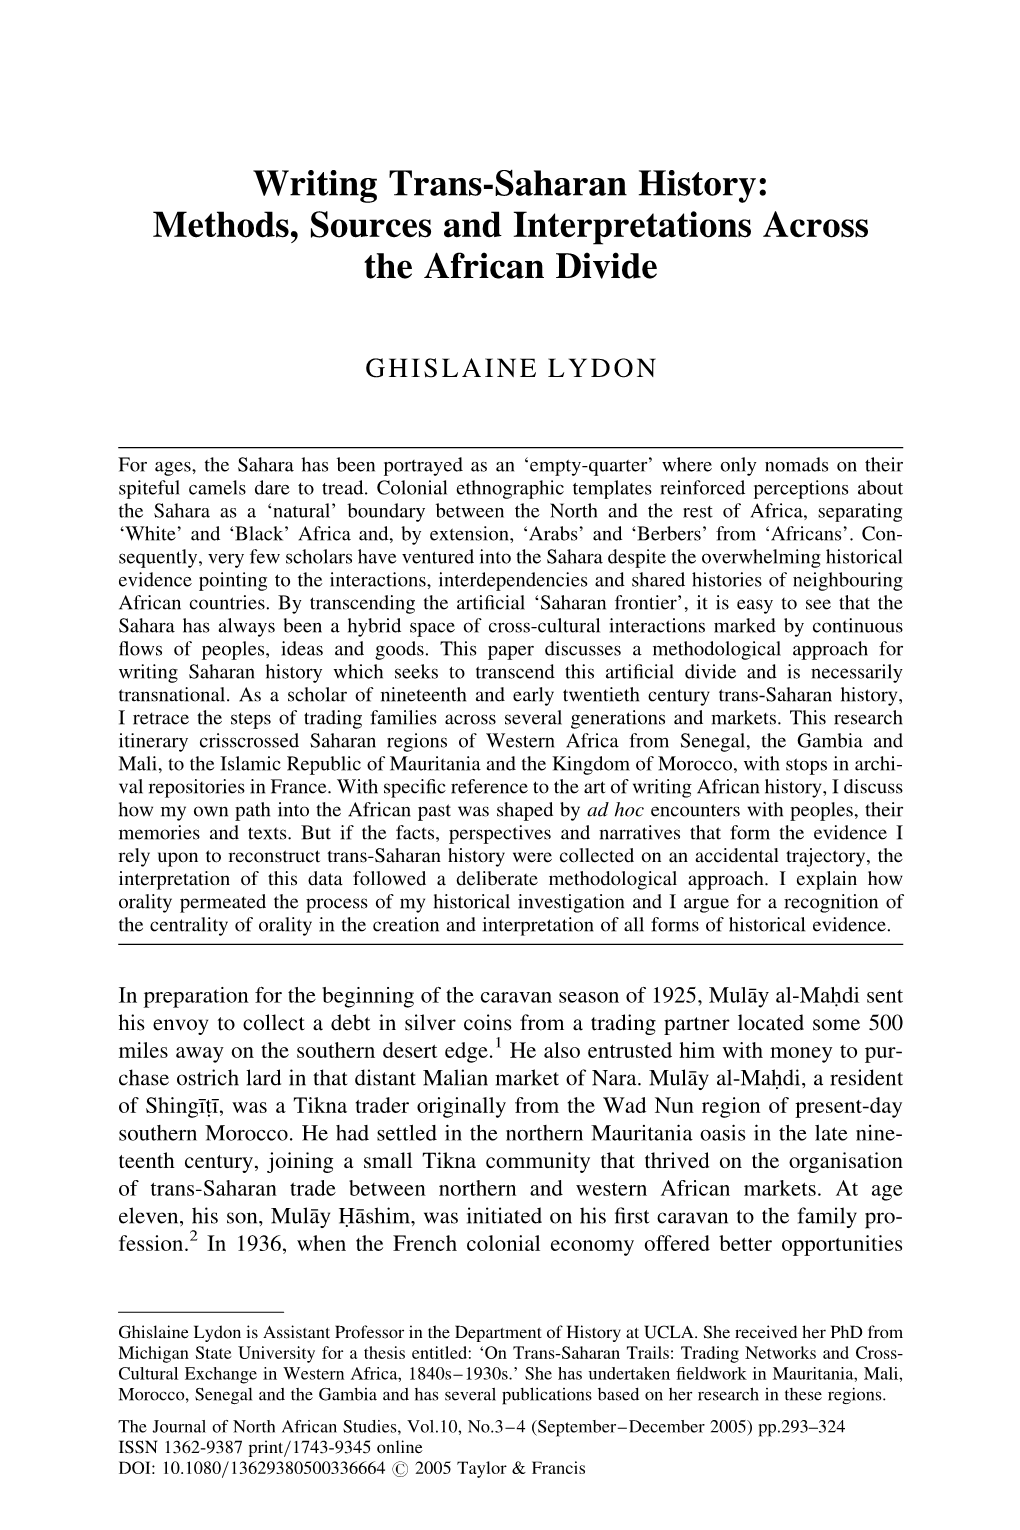 Writing Trans-Saharan History: Methods, Sources and Interpretations Across the African Divide